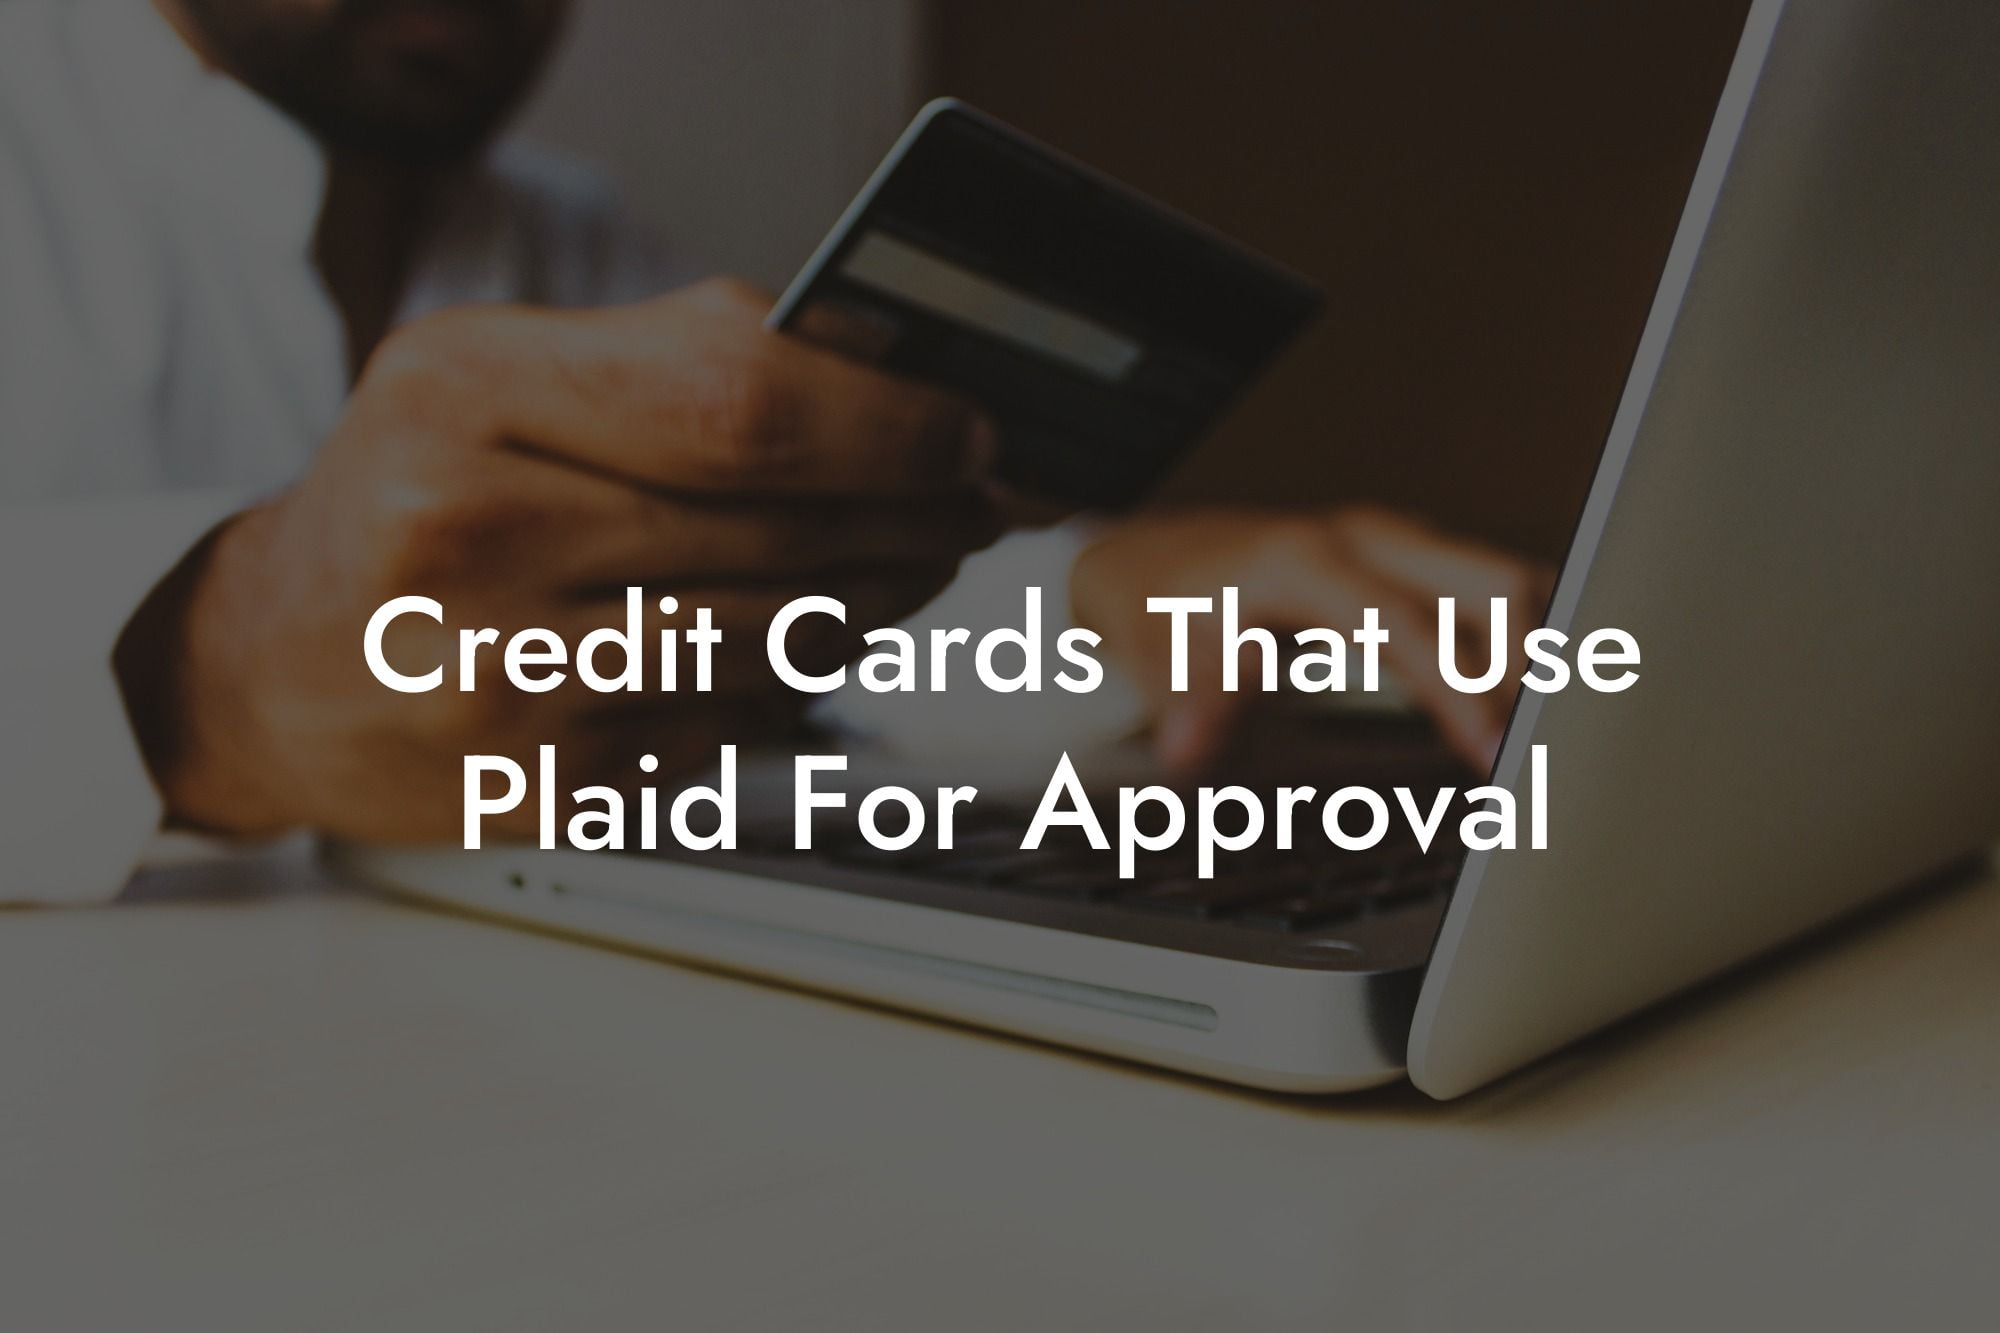 Credit Cards That Use Plaid For Approval